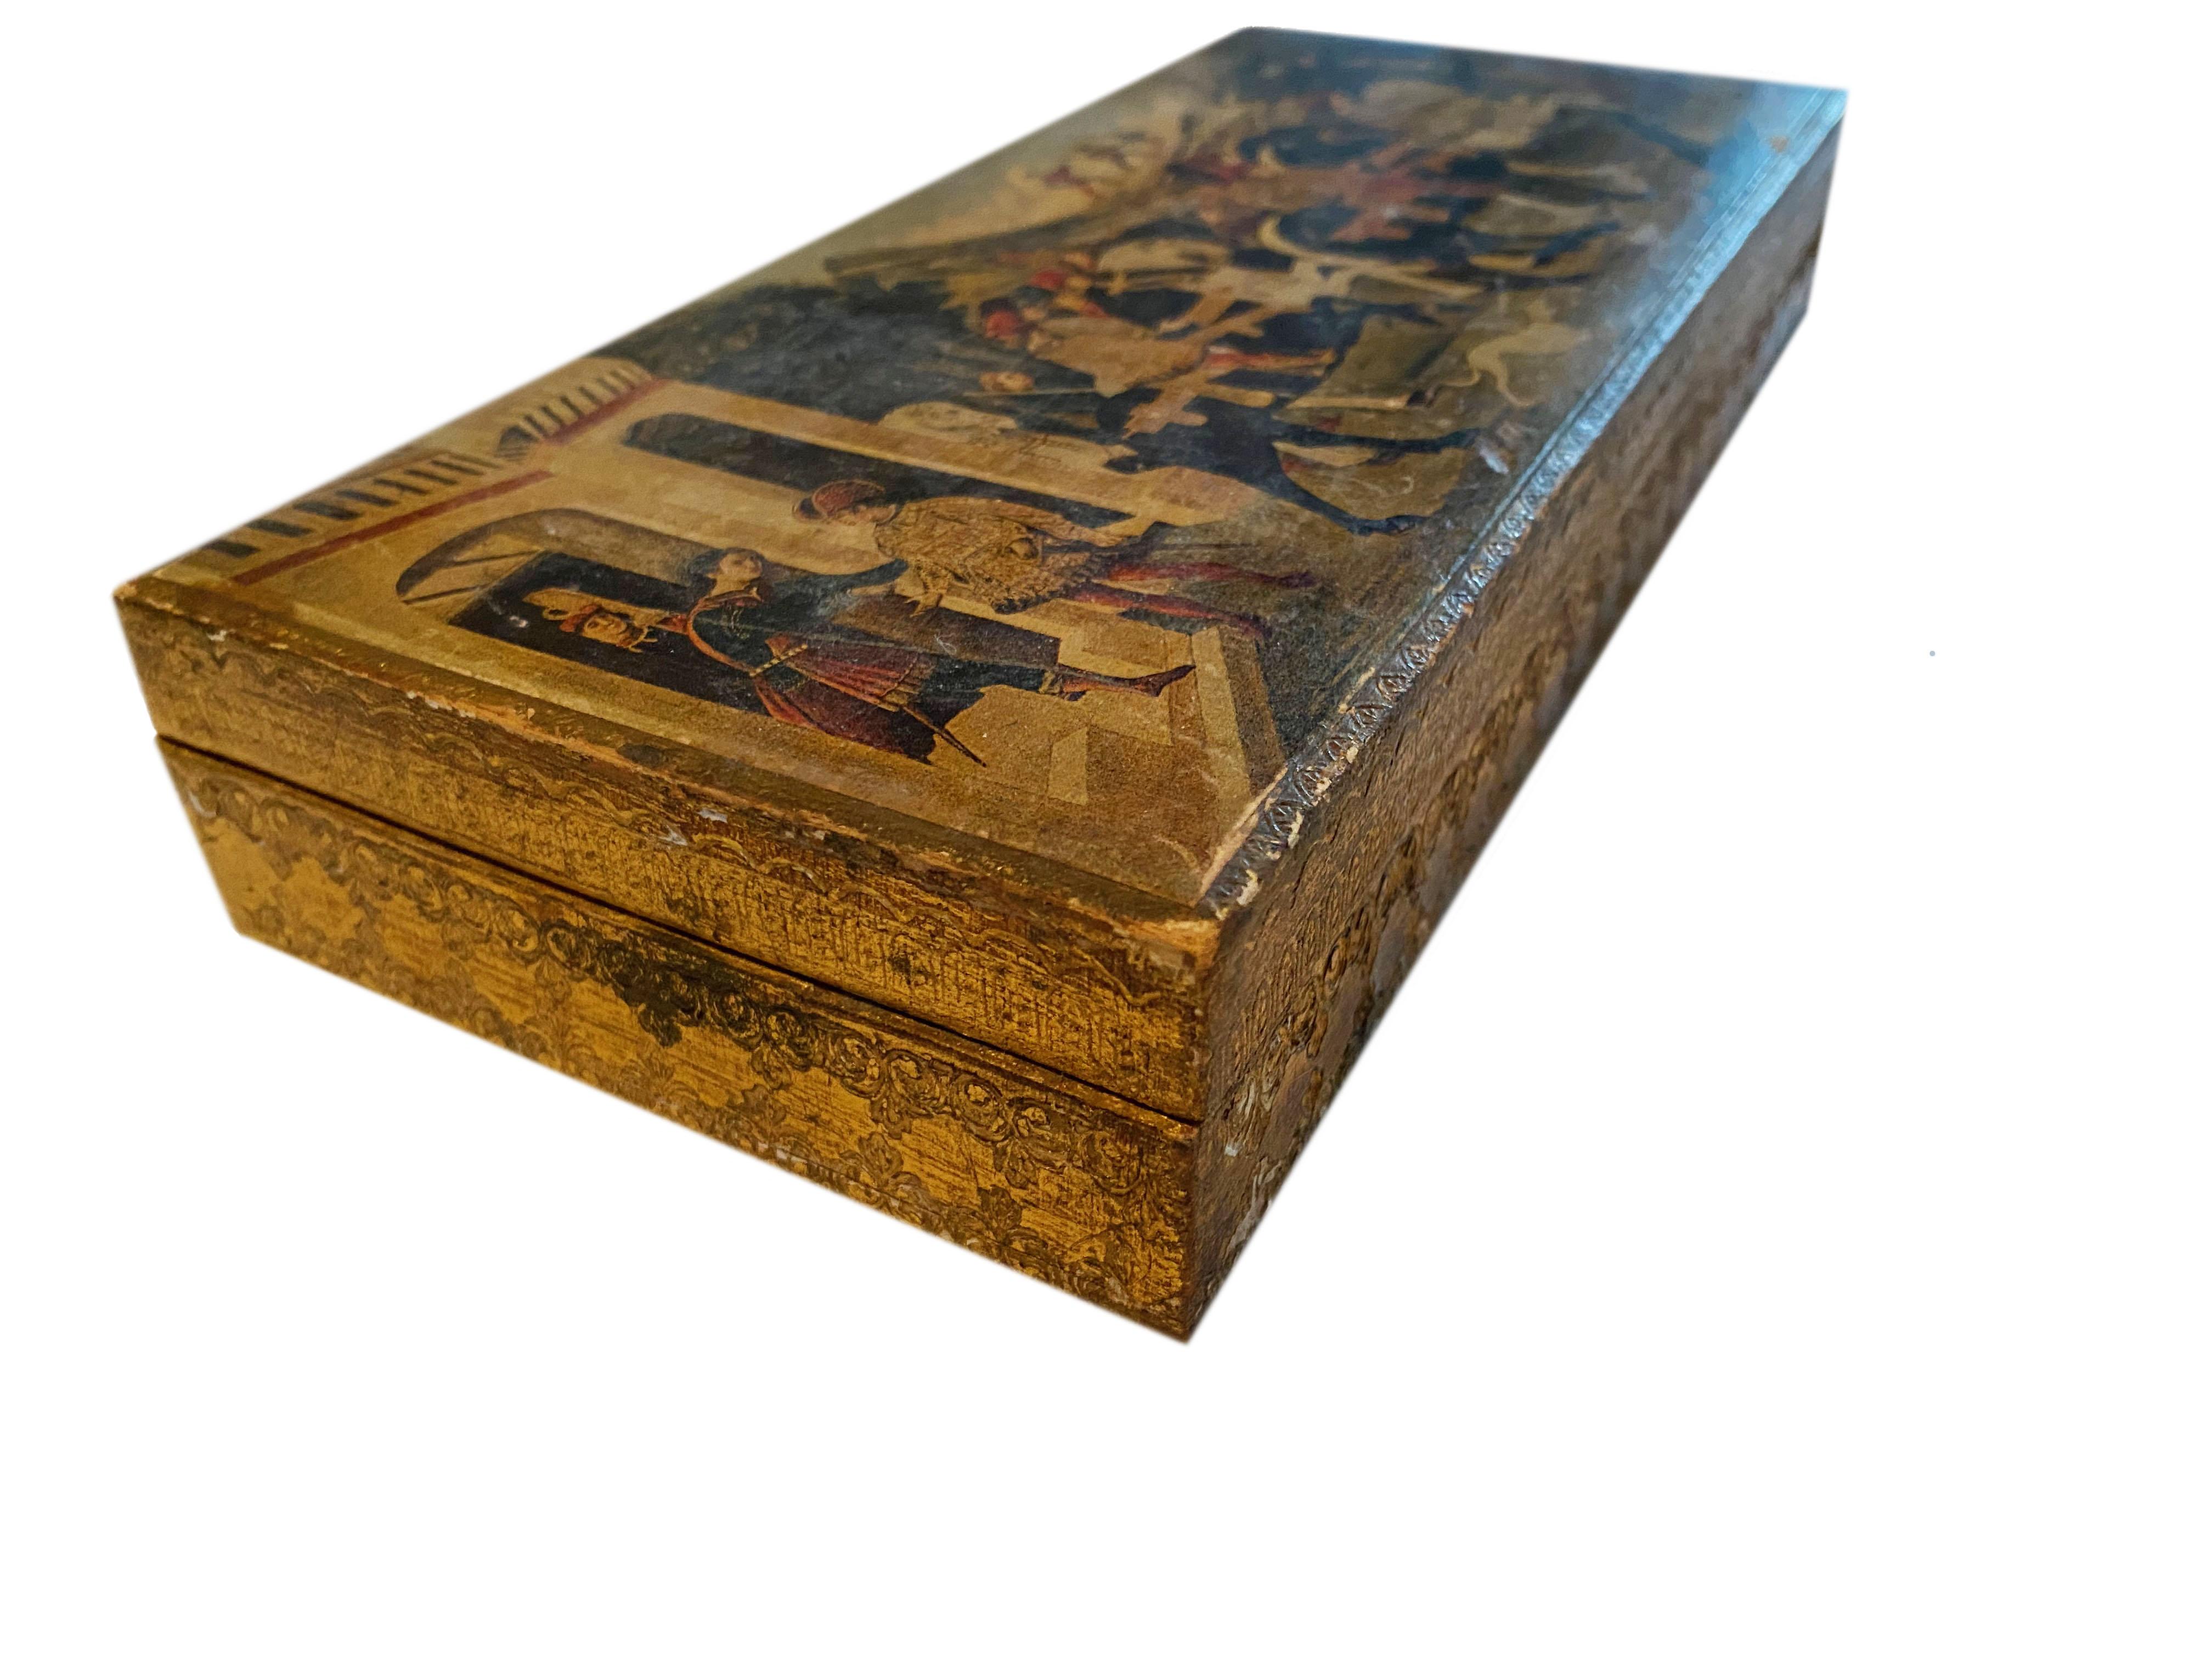 A wonderful Italian Florentine box with a festive European scene on top with horses, the Alps, dogs and more. Box has a hinged top.